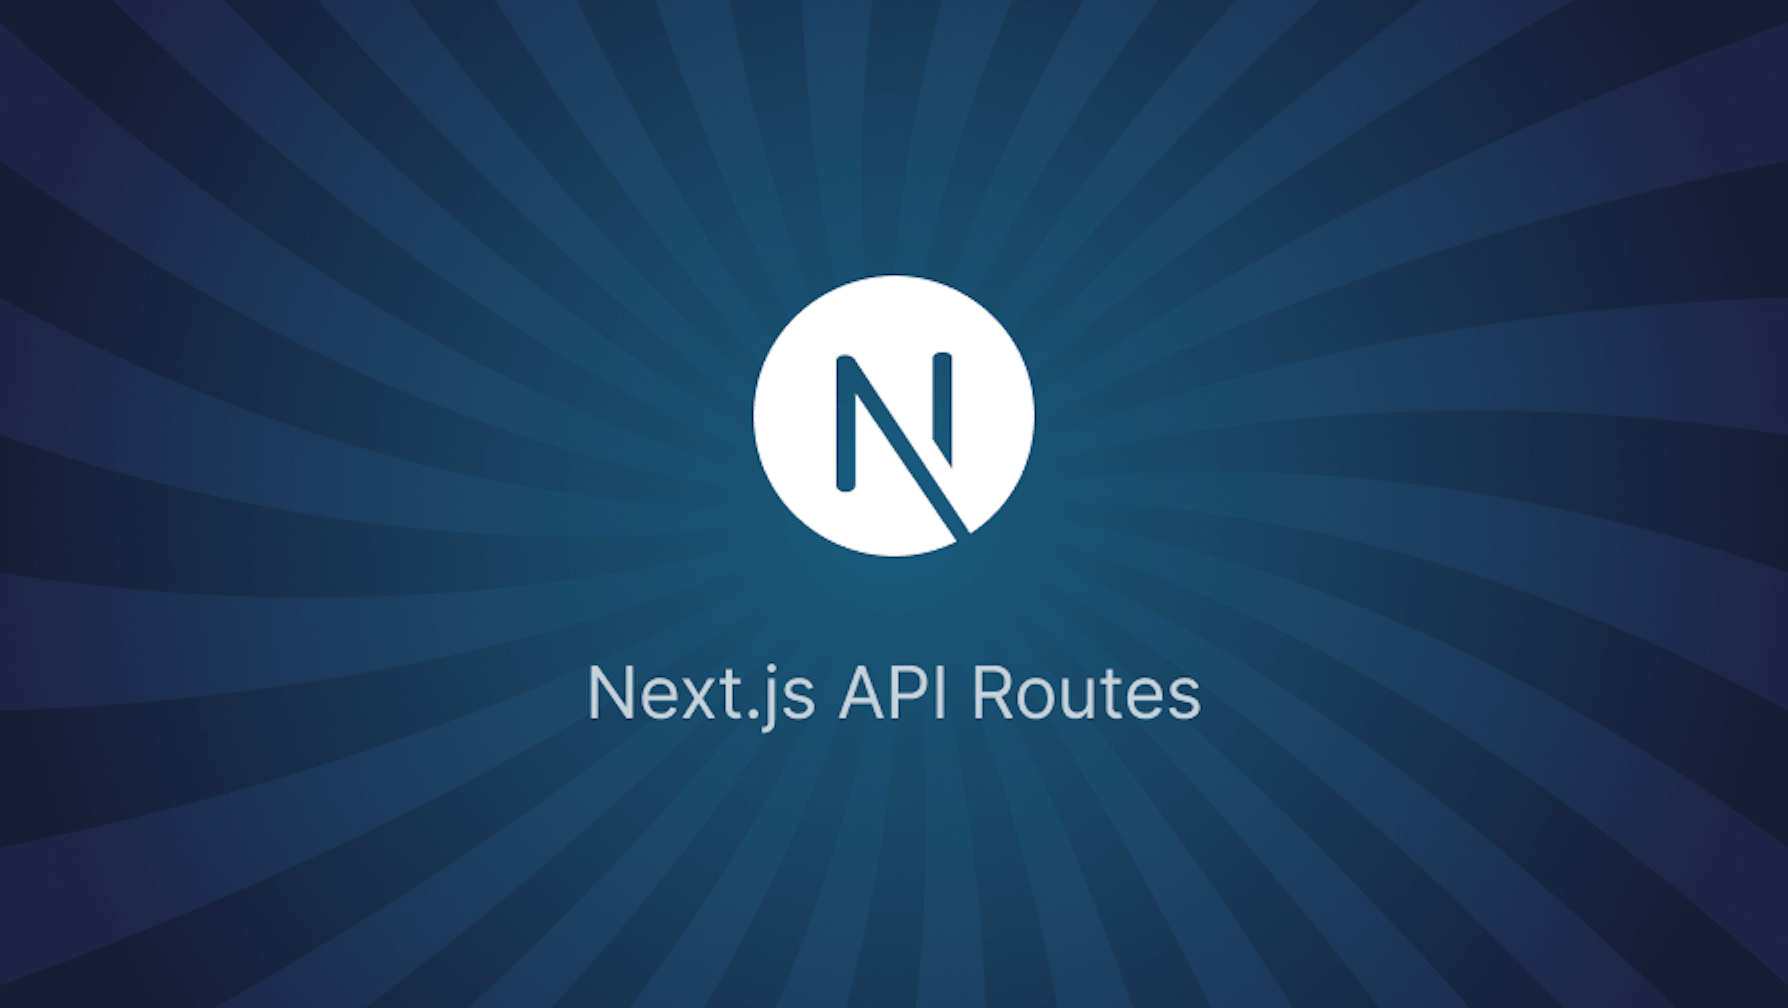 How to use Next.js API Routes?